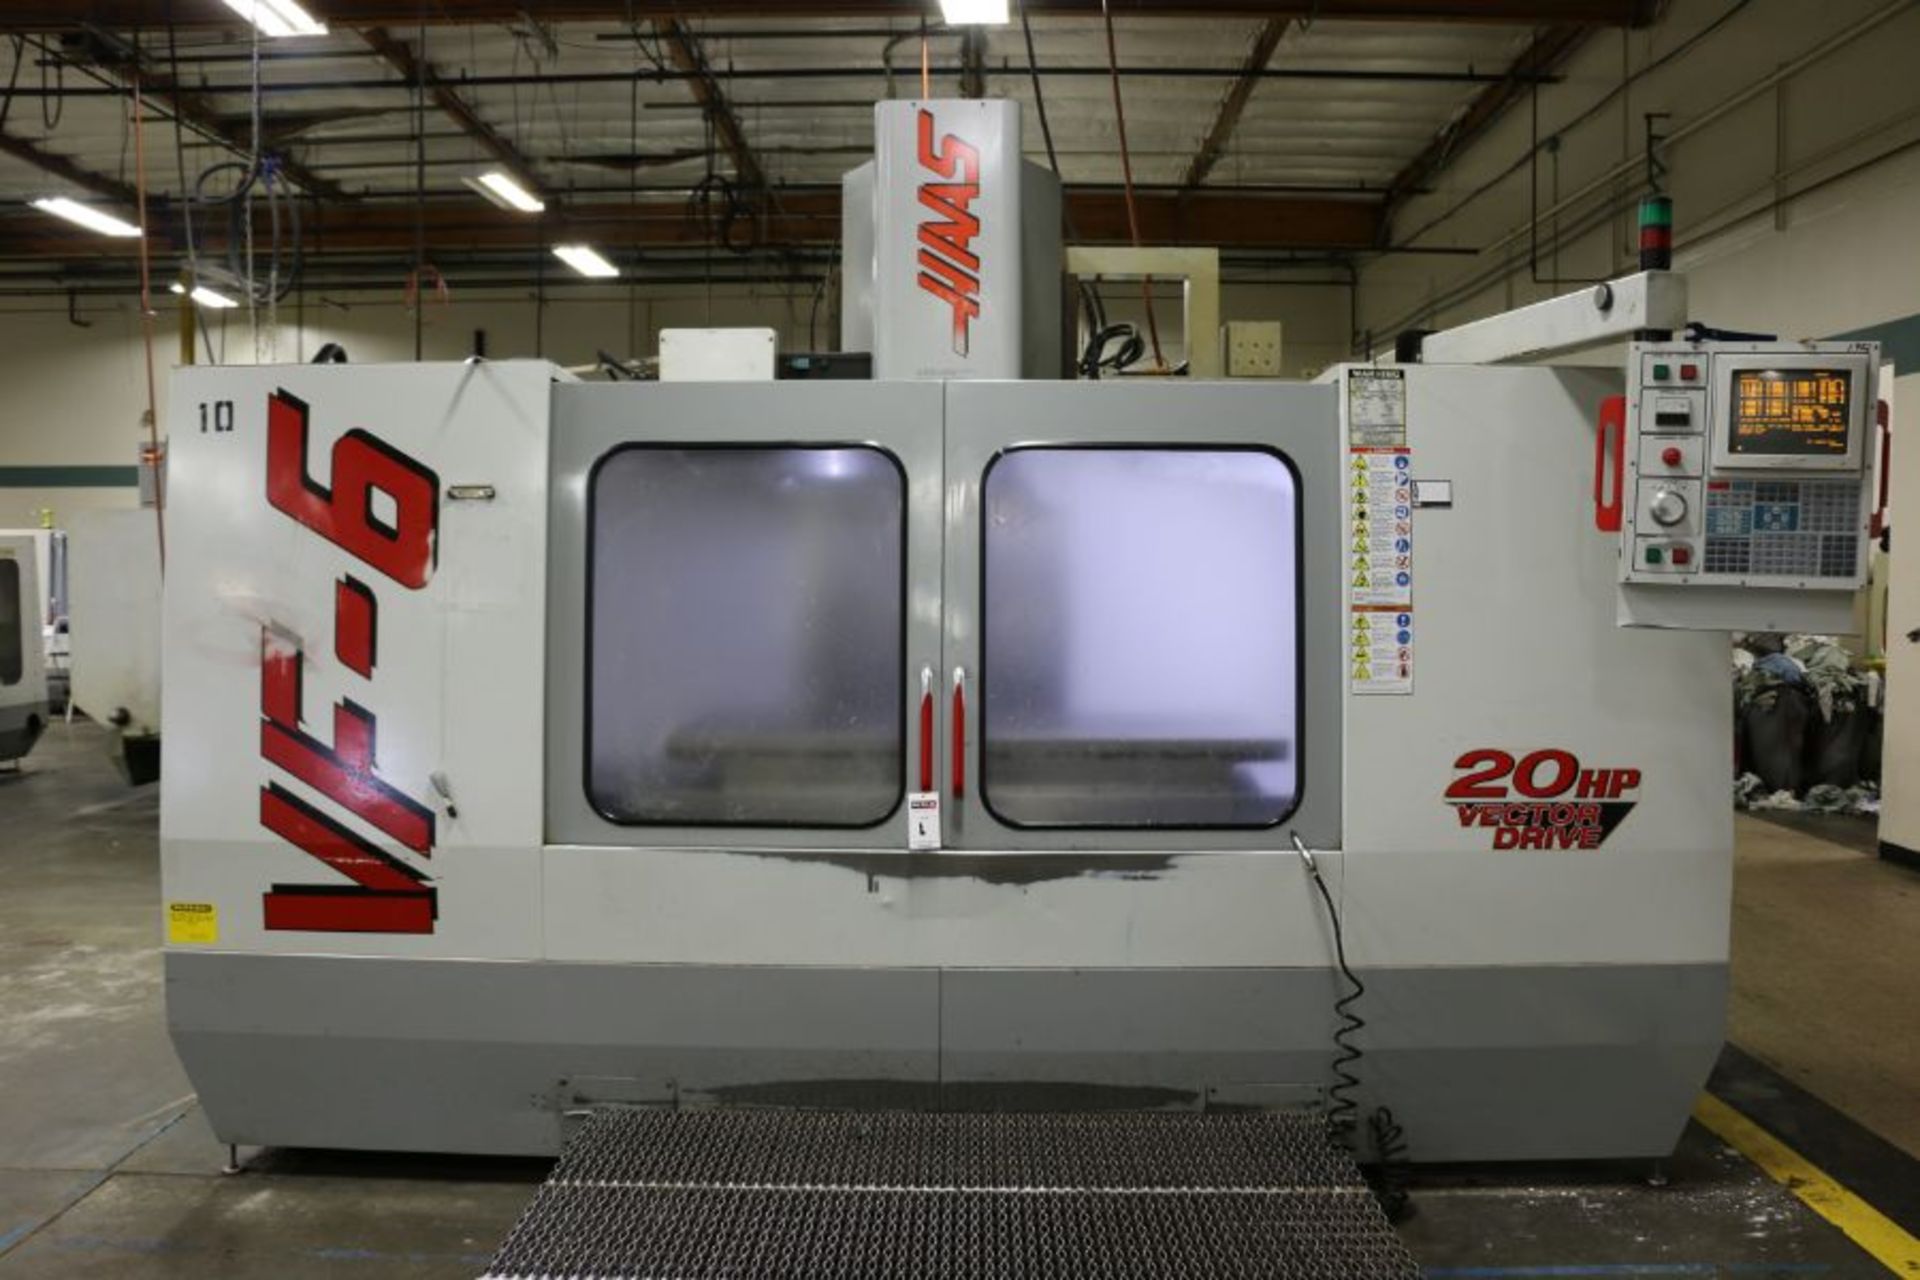 Haas VF-6, 64” x 32” x 30” Travels, 20 Position Tool Carousel, CTS, CT-40 Taper, s/n 12997, New 1998